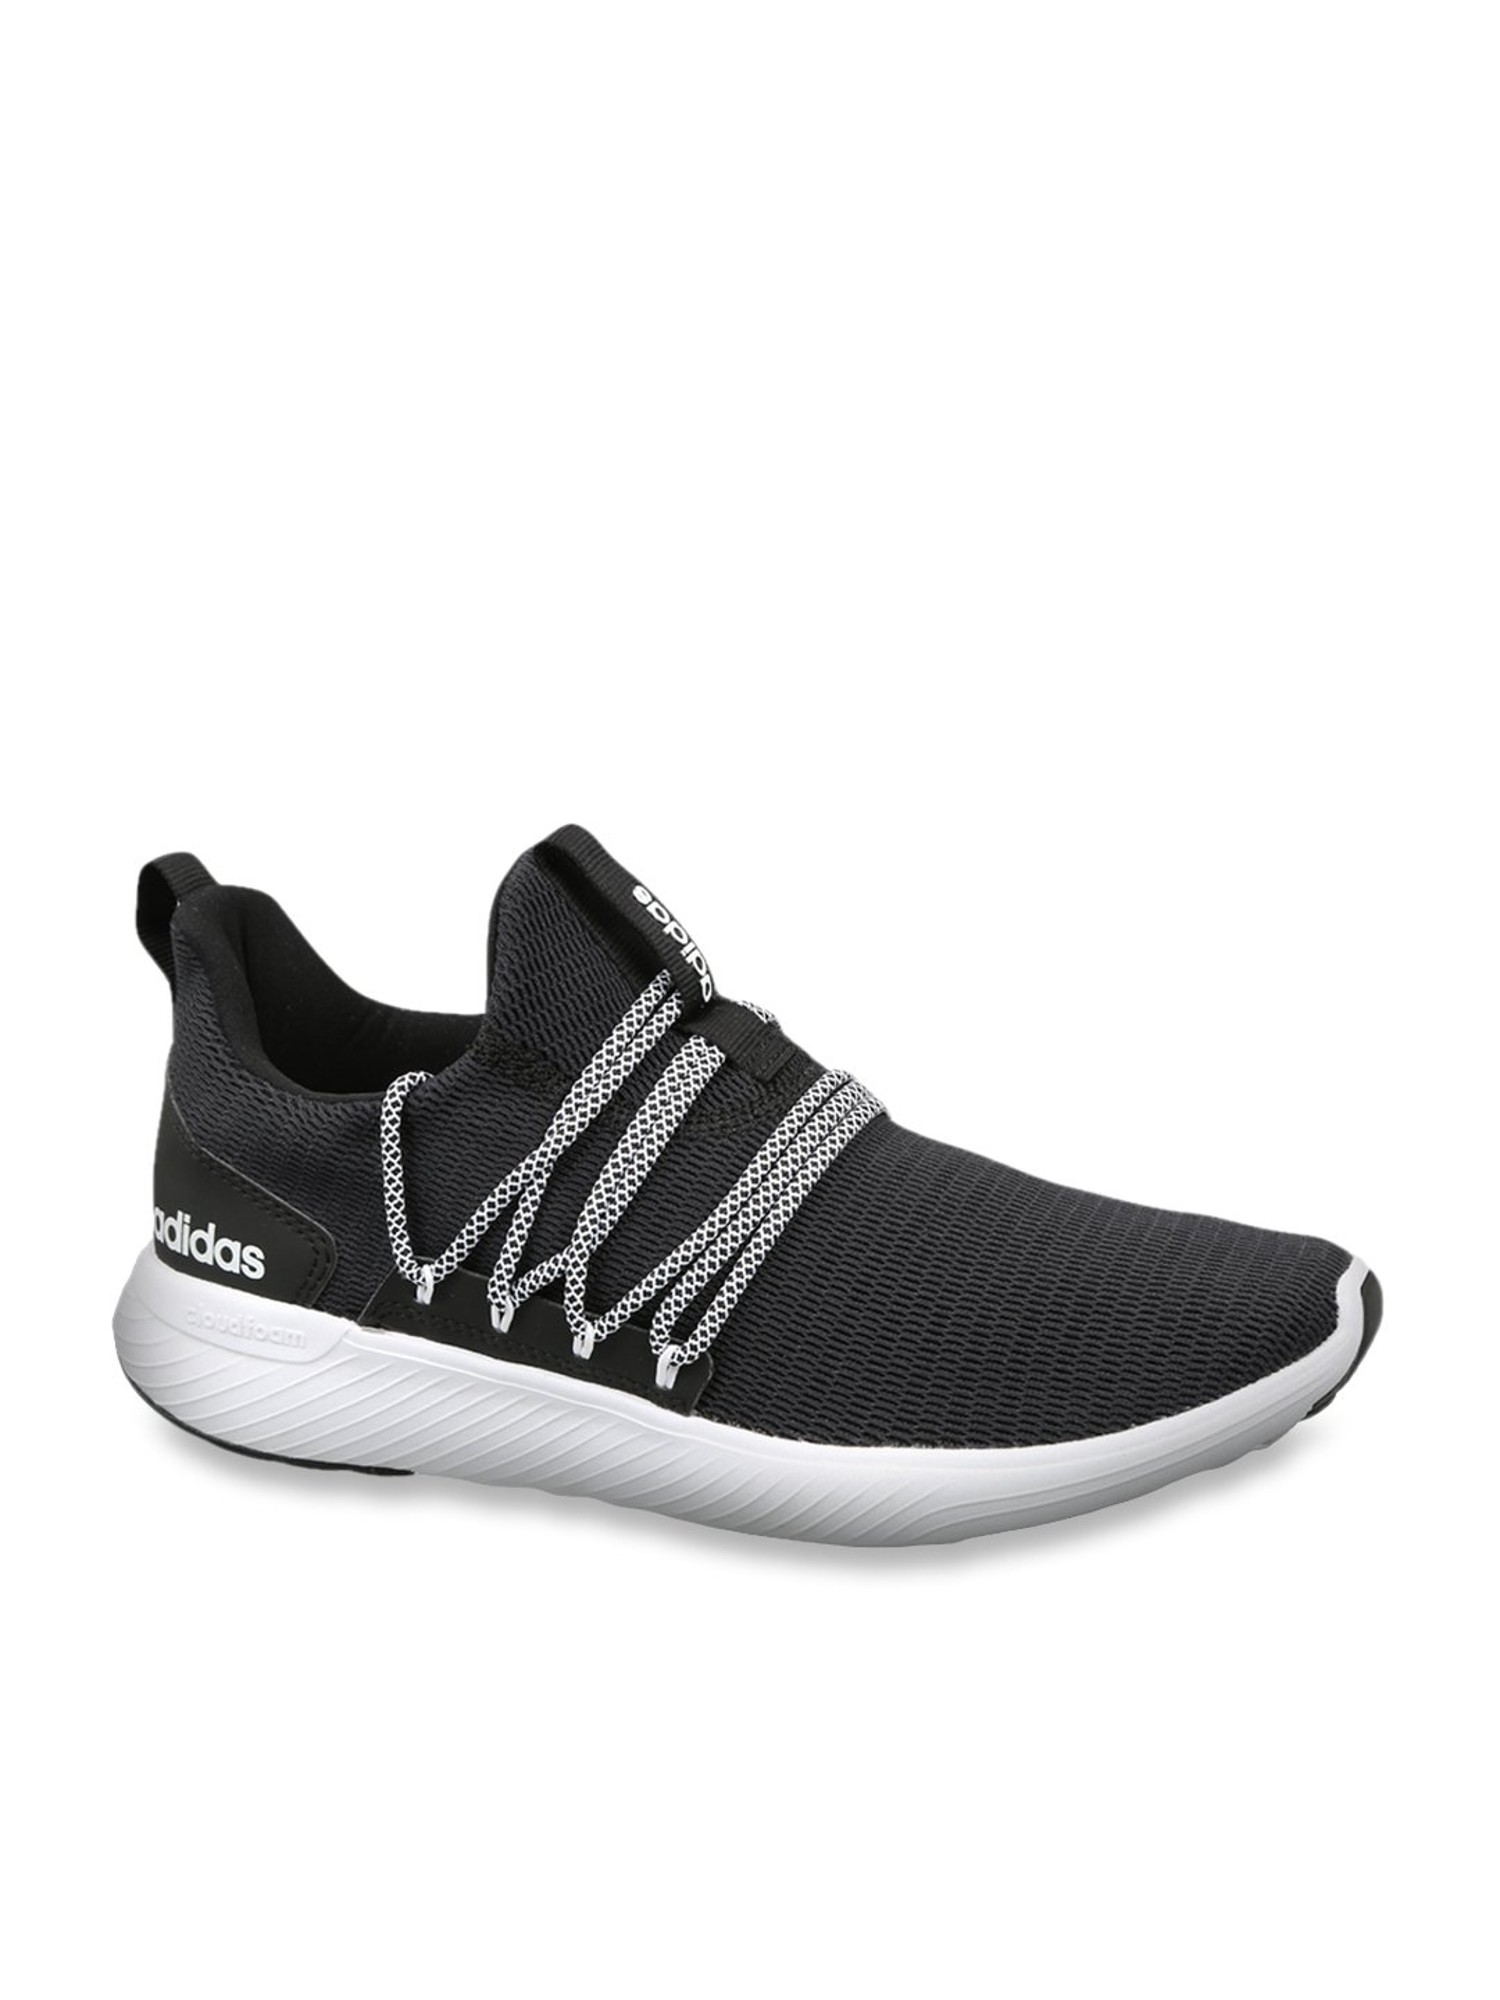 adidas laceit m running shoes